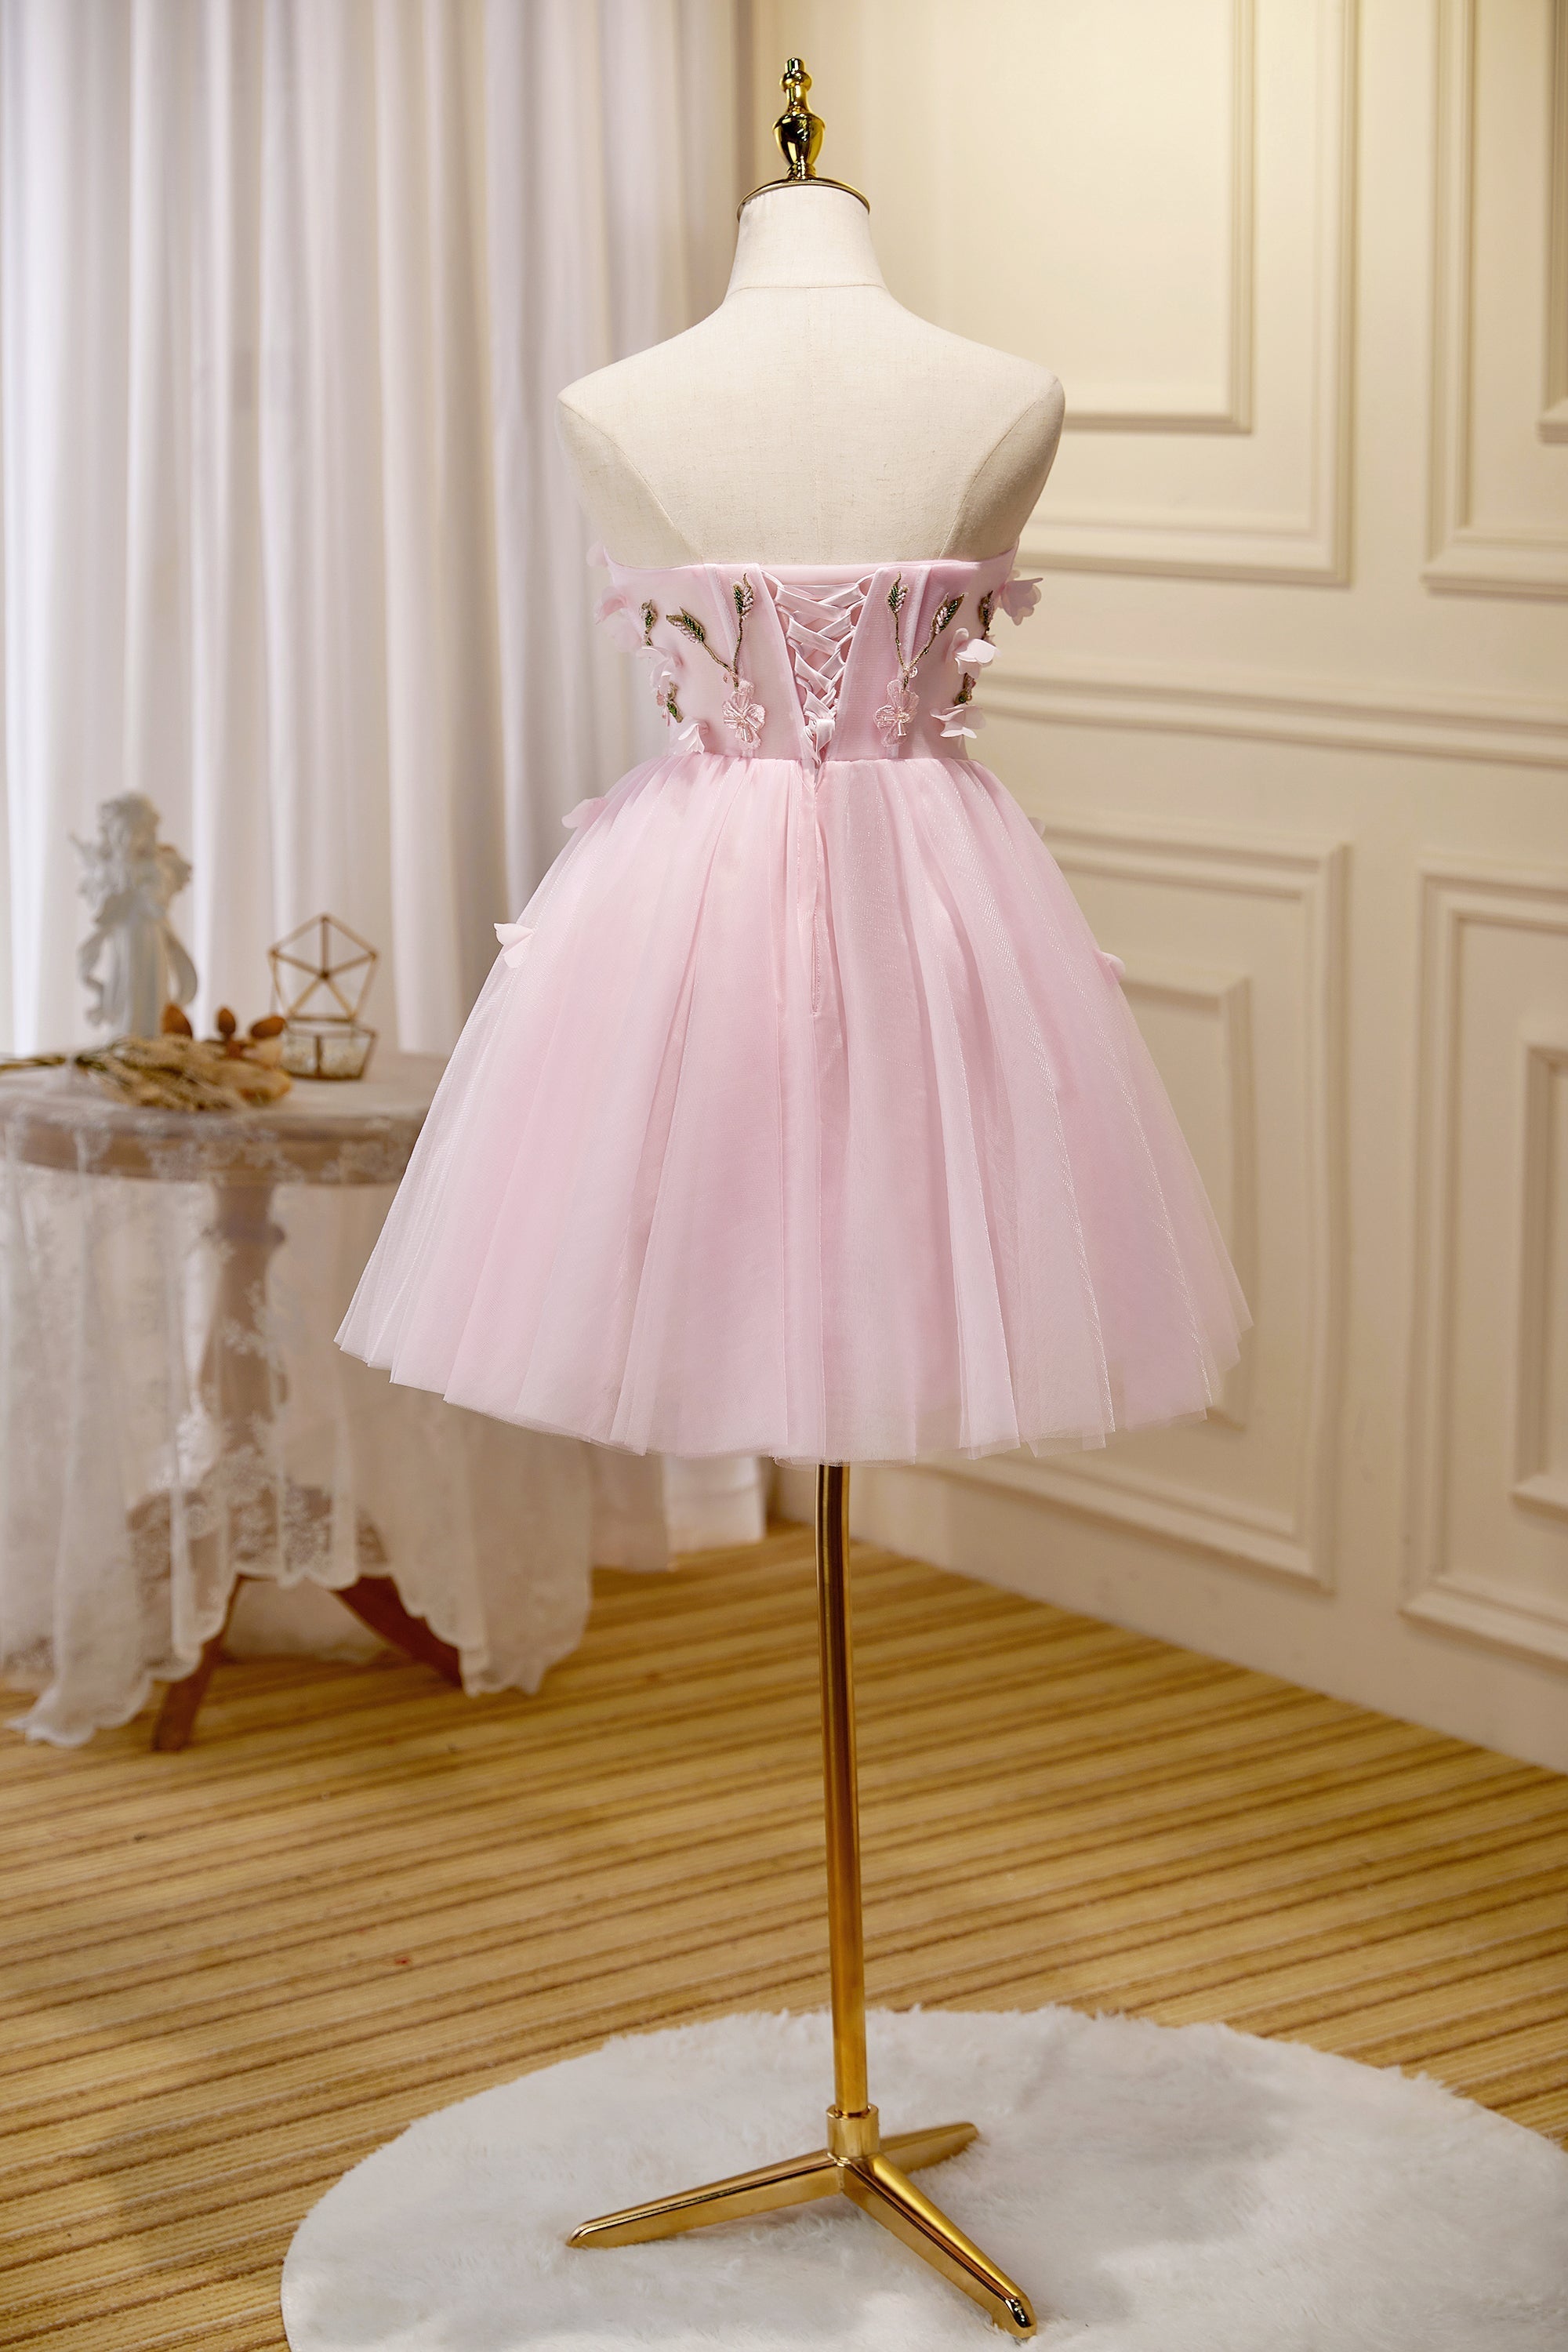 Prom Dress Black Girl, Cute Pink Strapless Sweetheart Appliques Tulle Short Homecoming Dresses